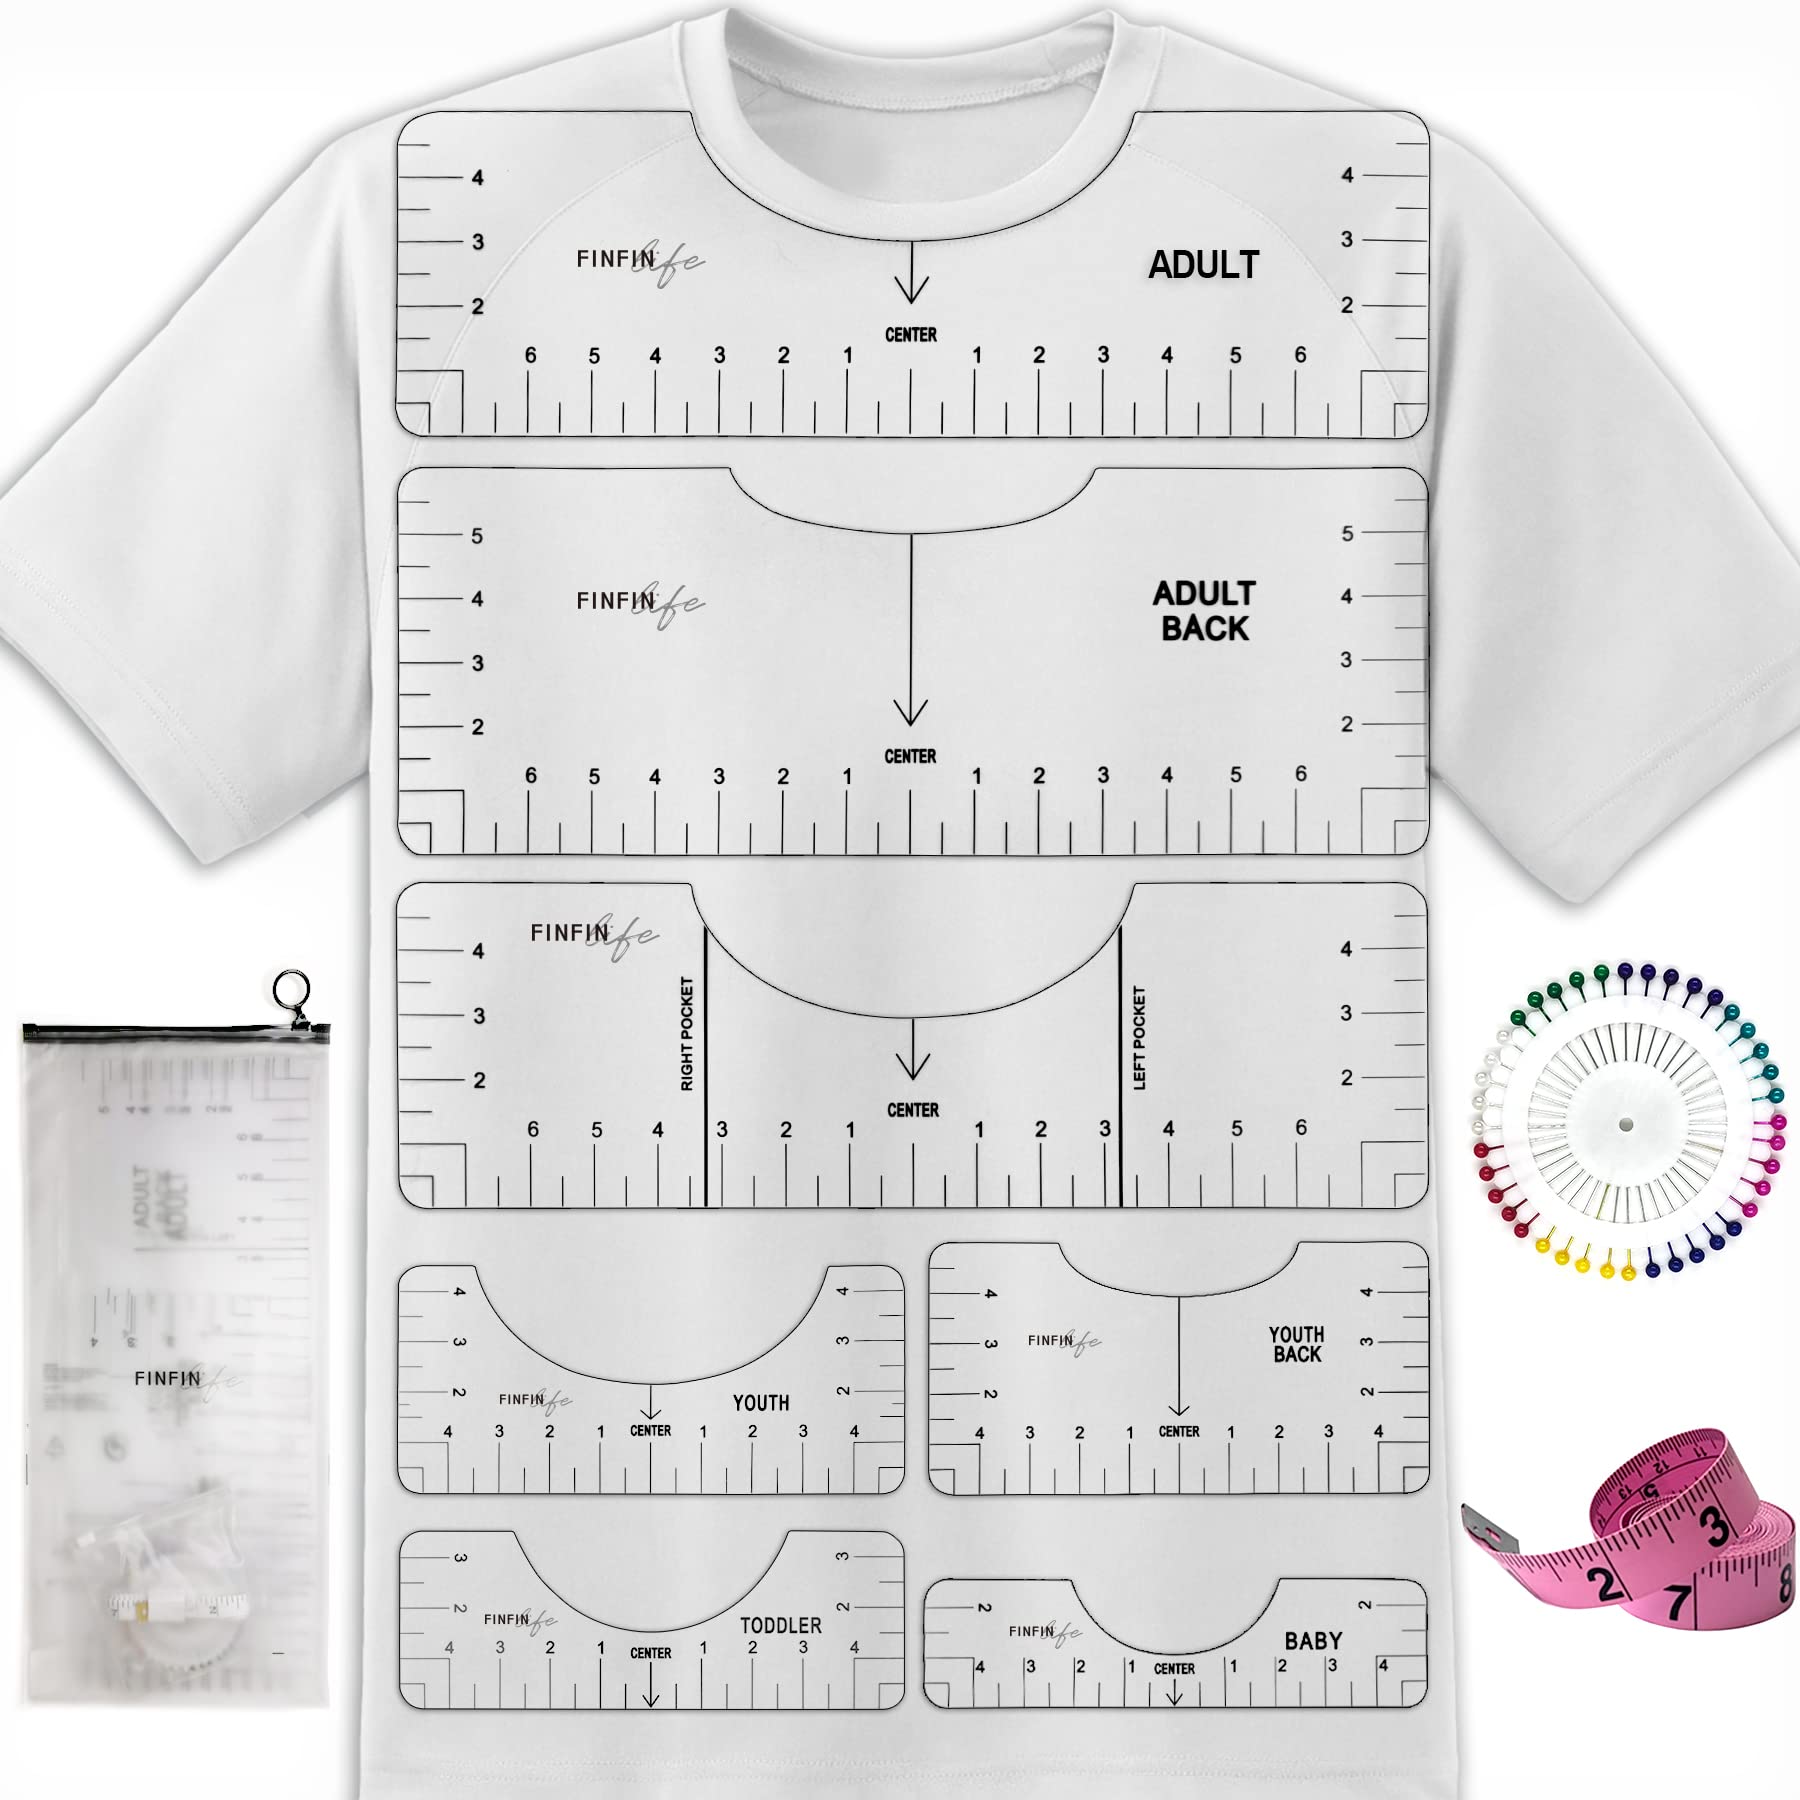 Tshirt Ruler Guide for Vinyl Alignment, Tshirt Rulers to Center Designs, Alignment Tool with Soft Tape Measure,Pencil, Size: One size, 1 Pack